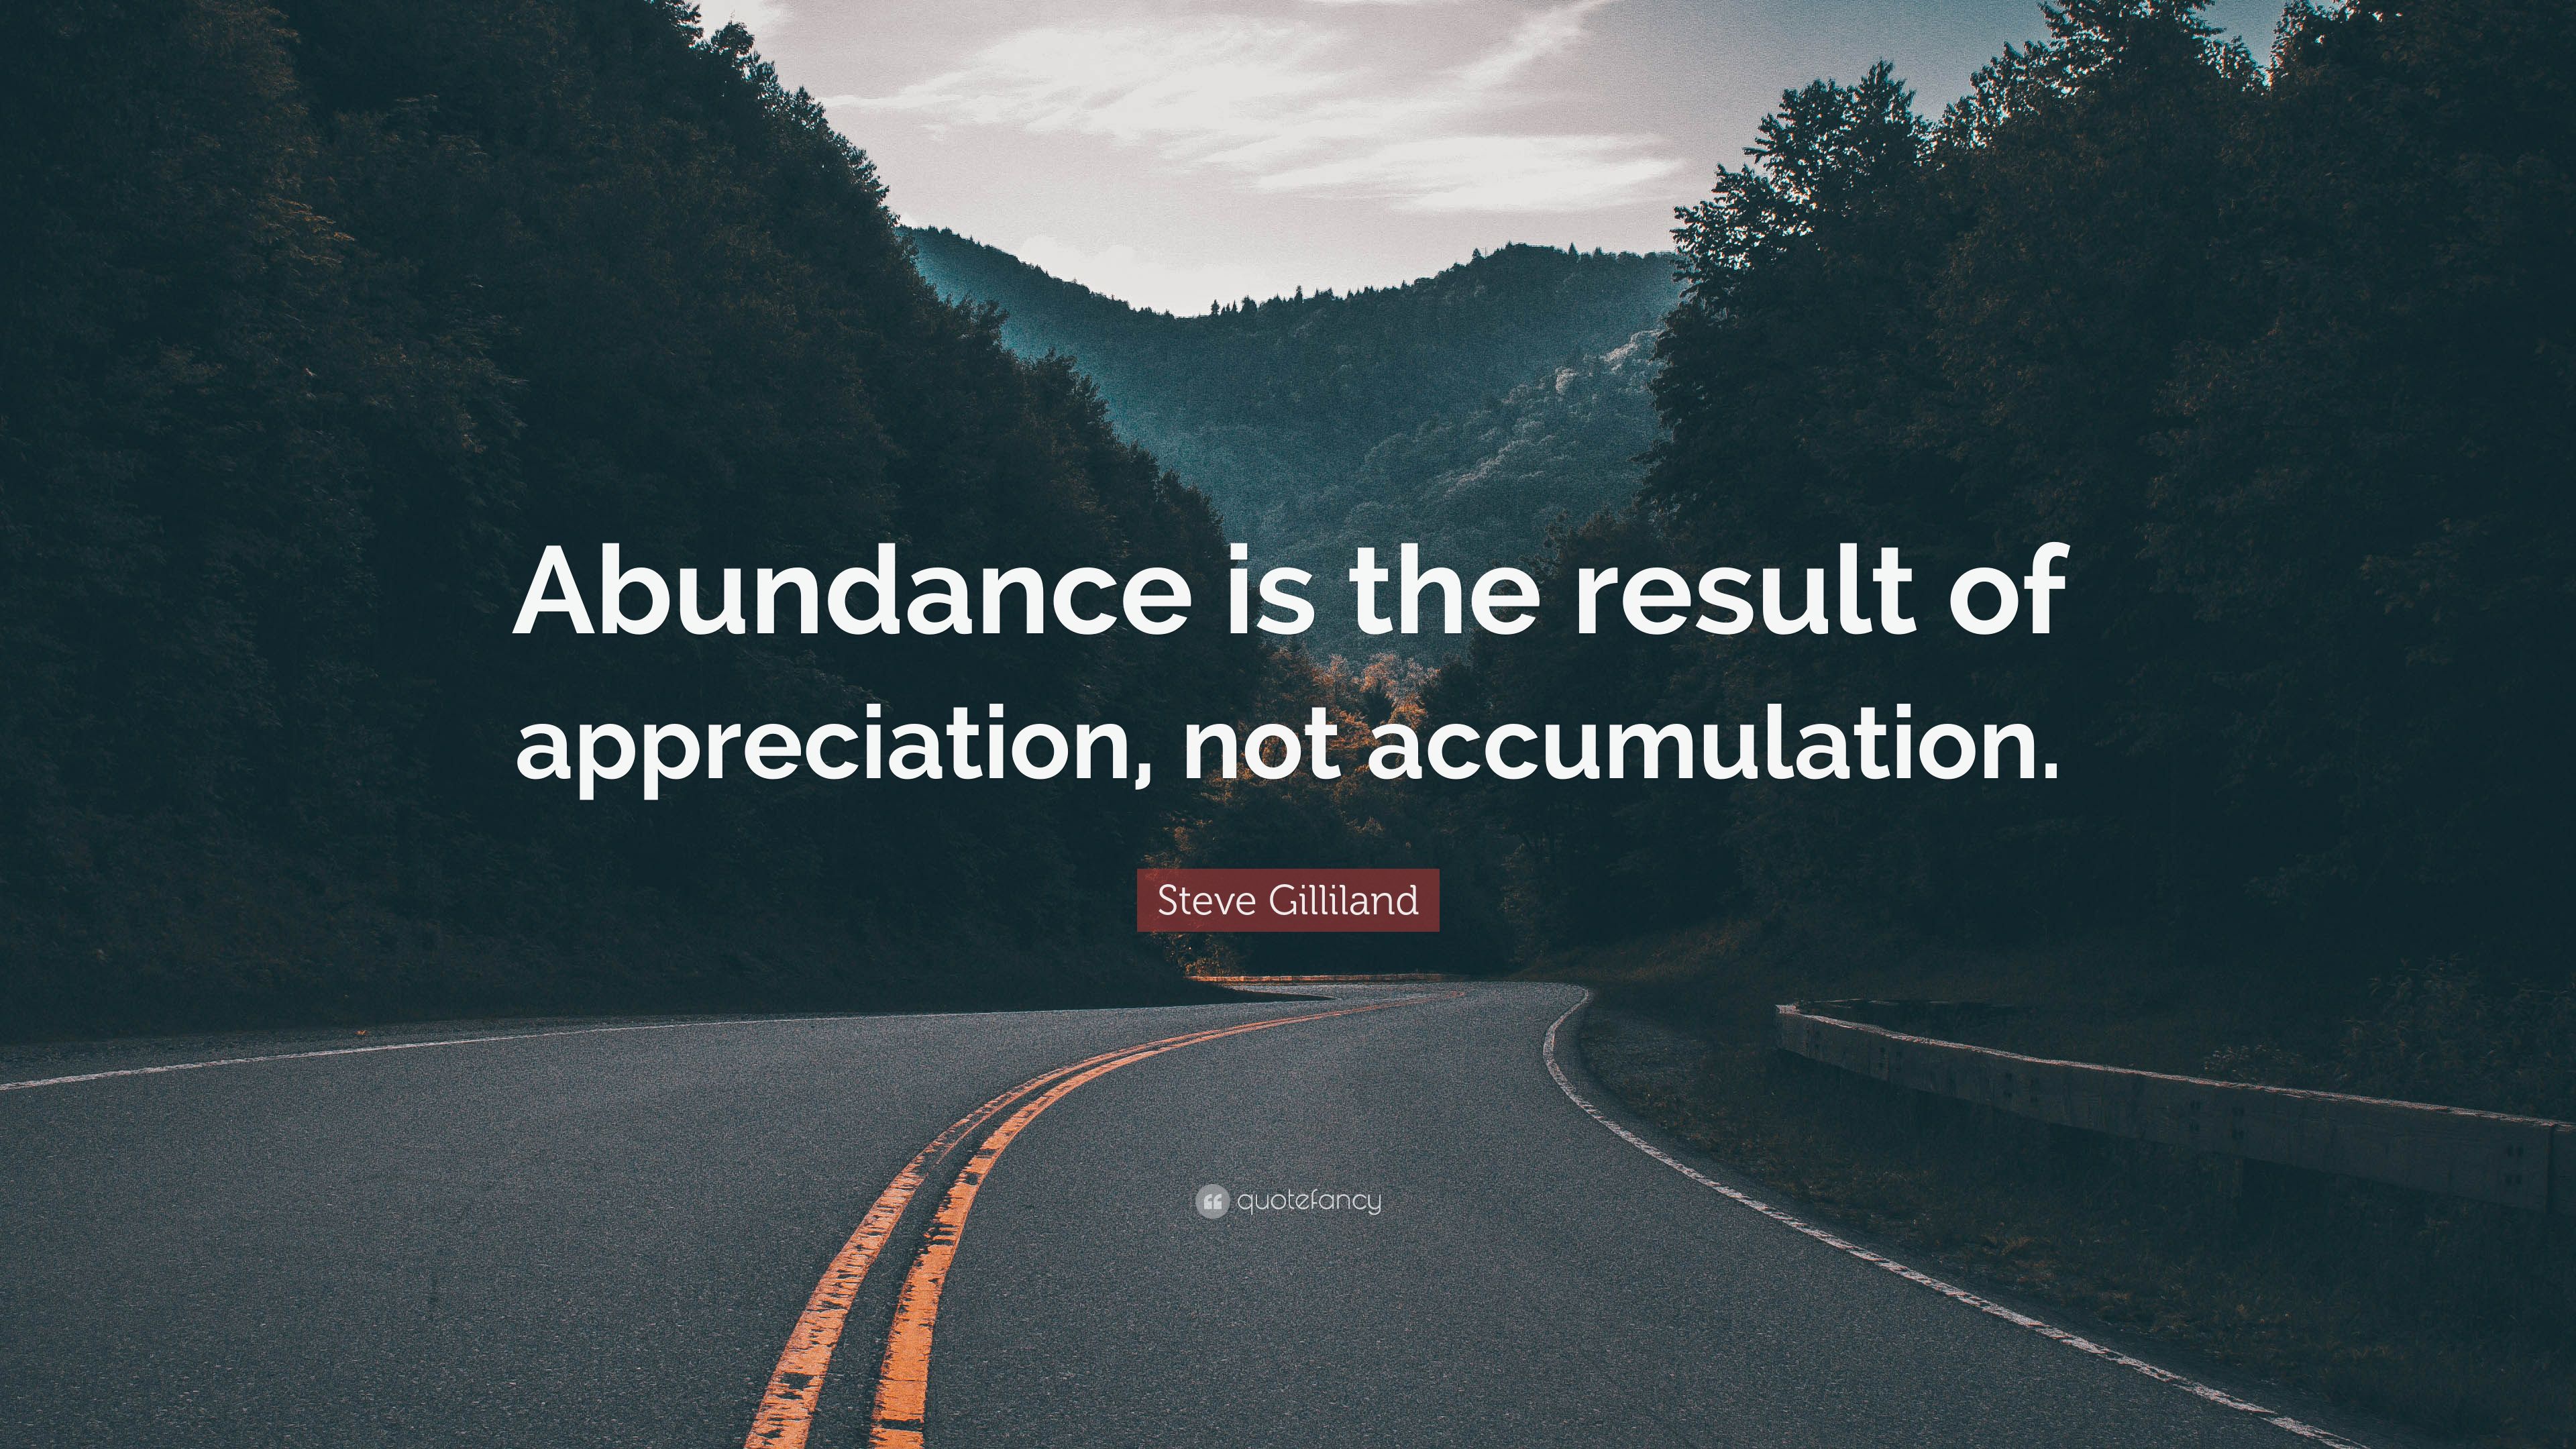 Steve Gilliland Quote: “Abundance is the result of appreciation